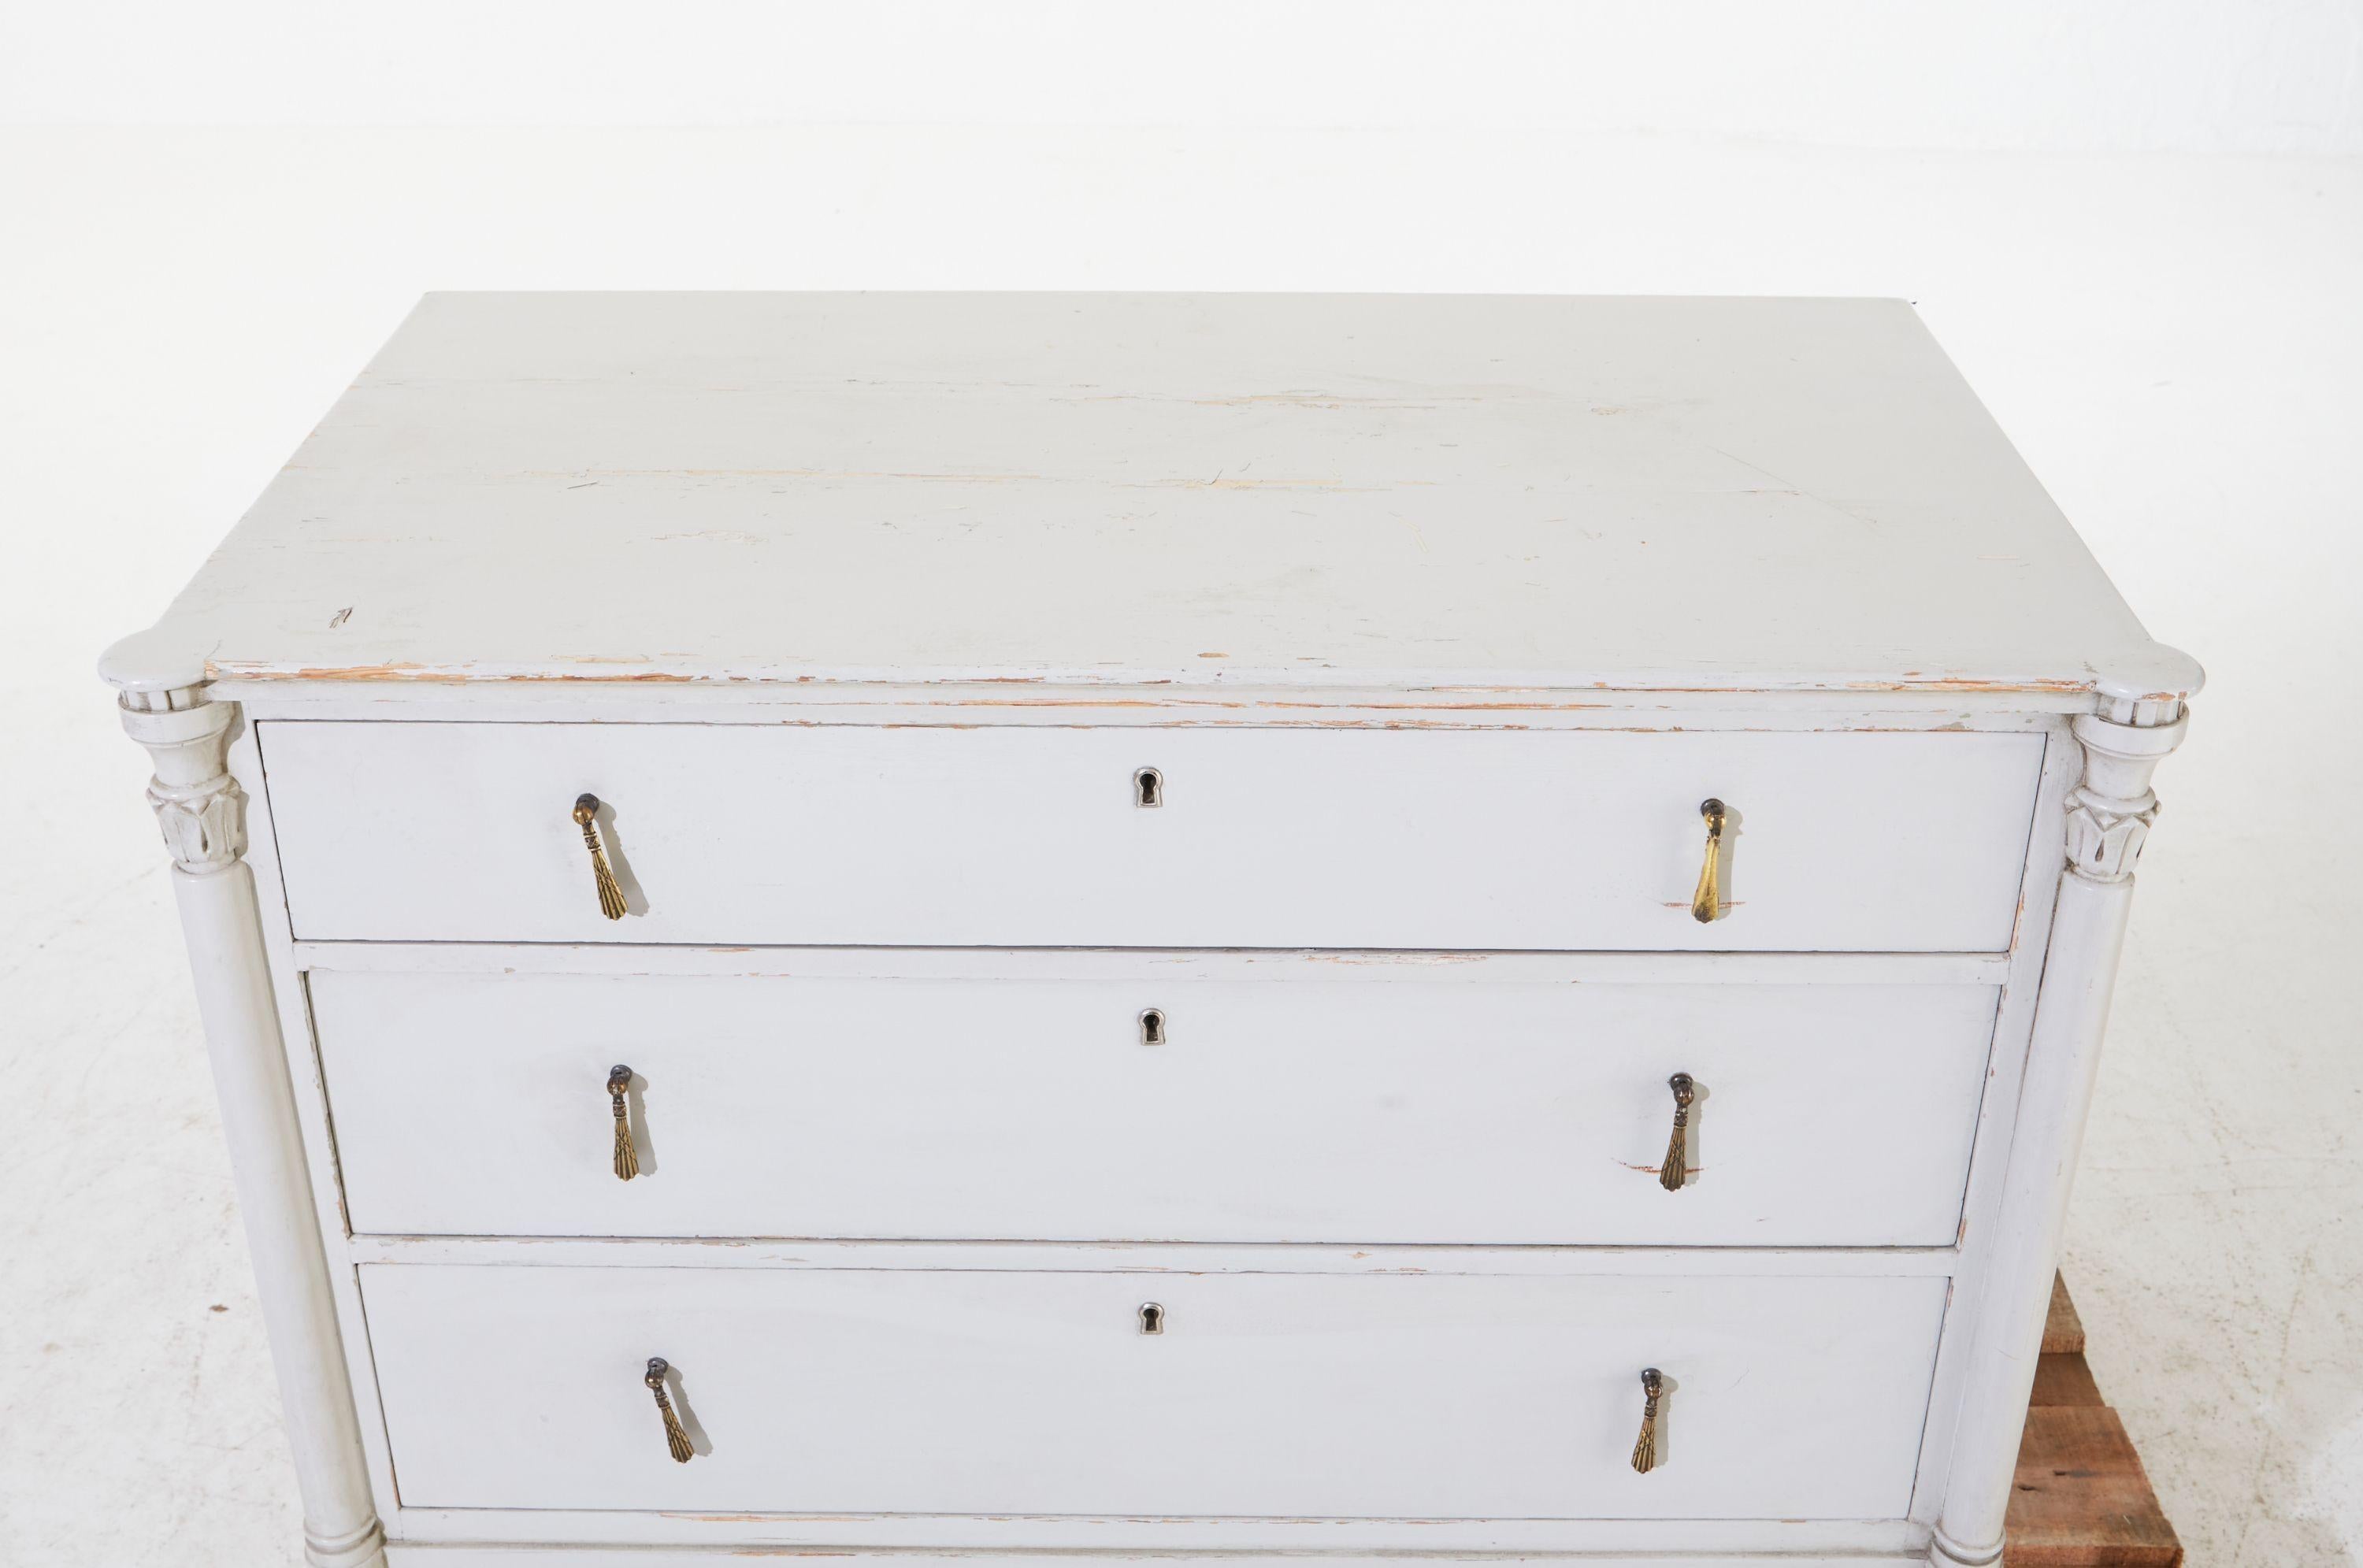 1900s grey painted Gustavian bureau with three drawers, carved legs & original brass hardware. Chest of drawers painted a calm Scandinavian creamy grey with authentic patina that only comes with gentle aging. Sturdy, strong, and so pretty with three